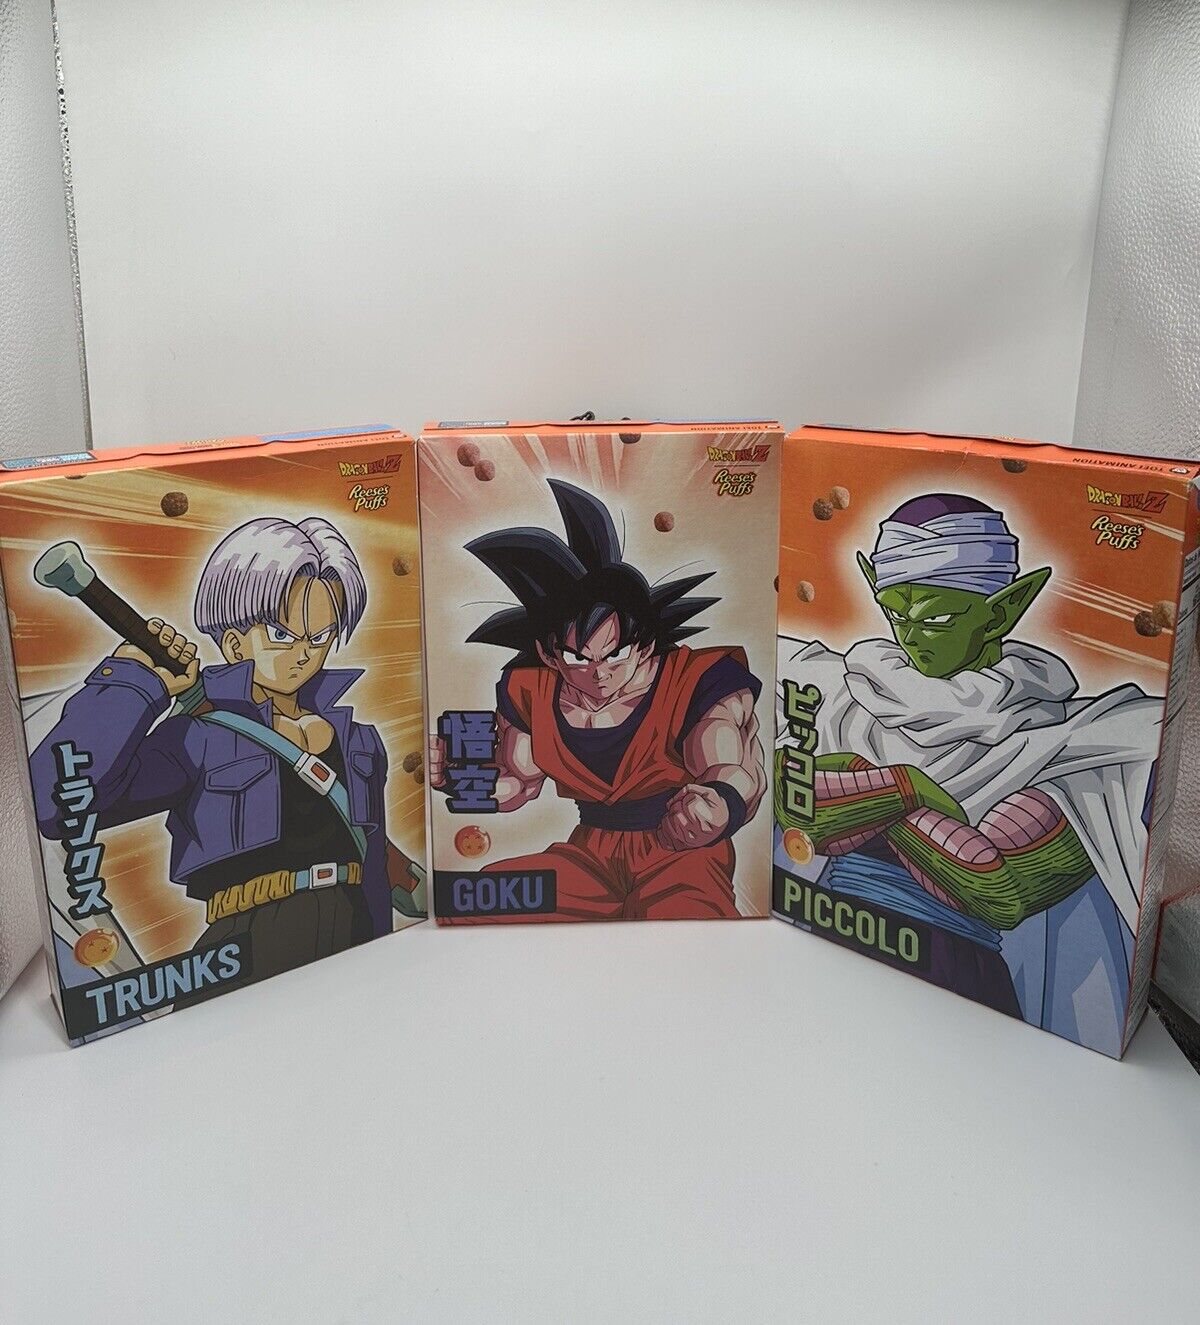 3x Dragonball Z Reese’s Puffs Limited Edition Cereal Trunks Goku Piccolo Anime